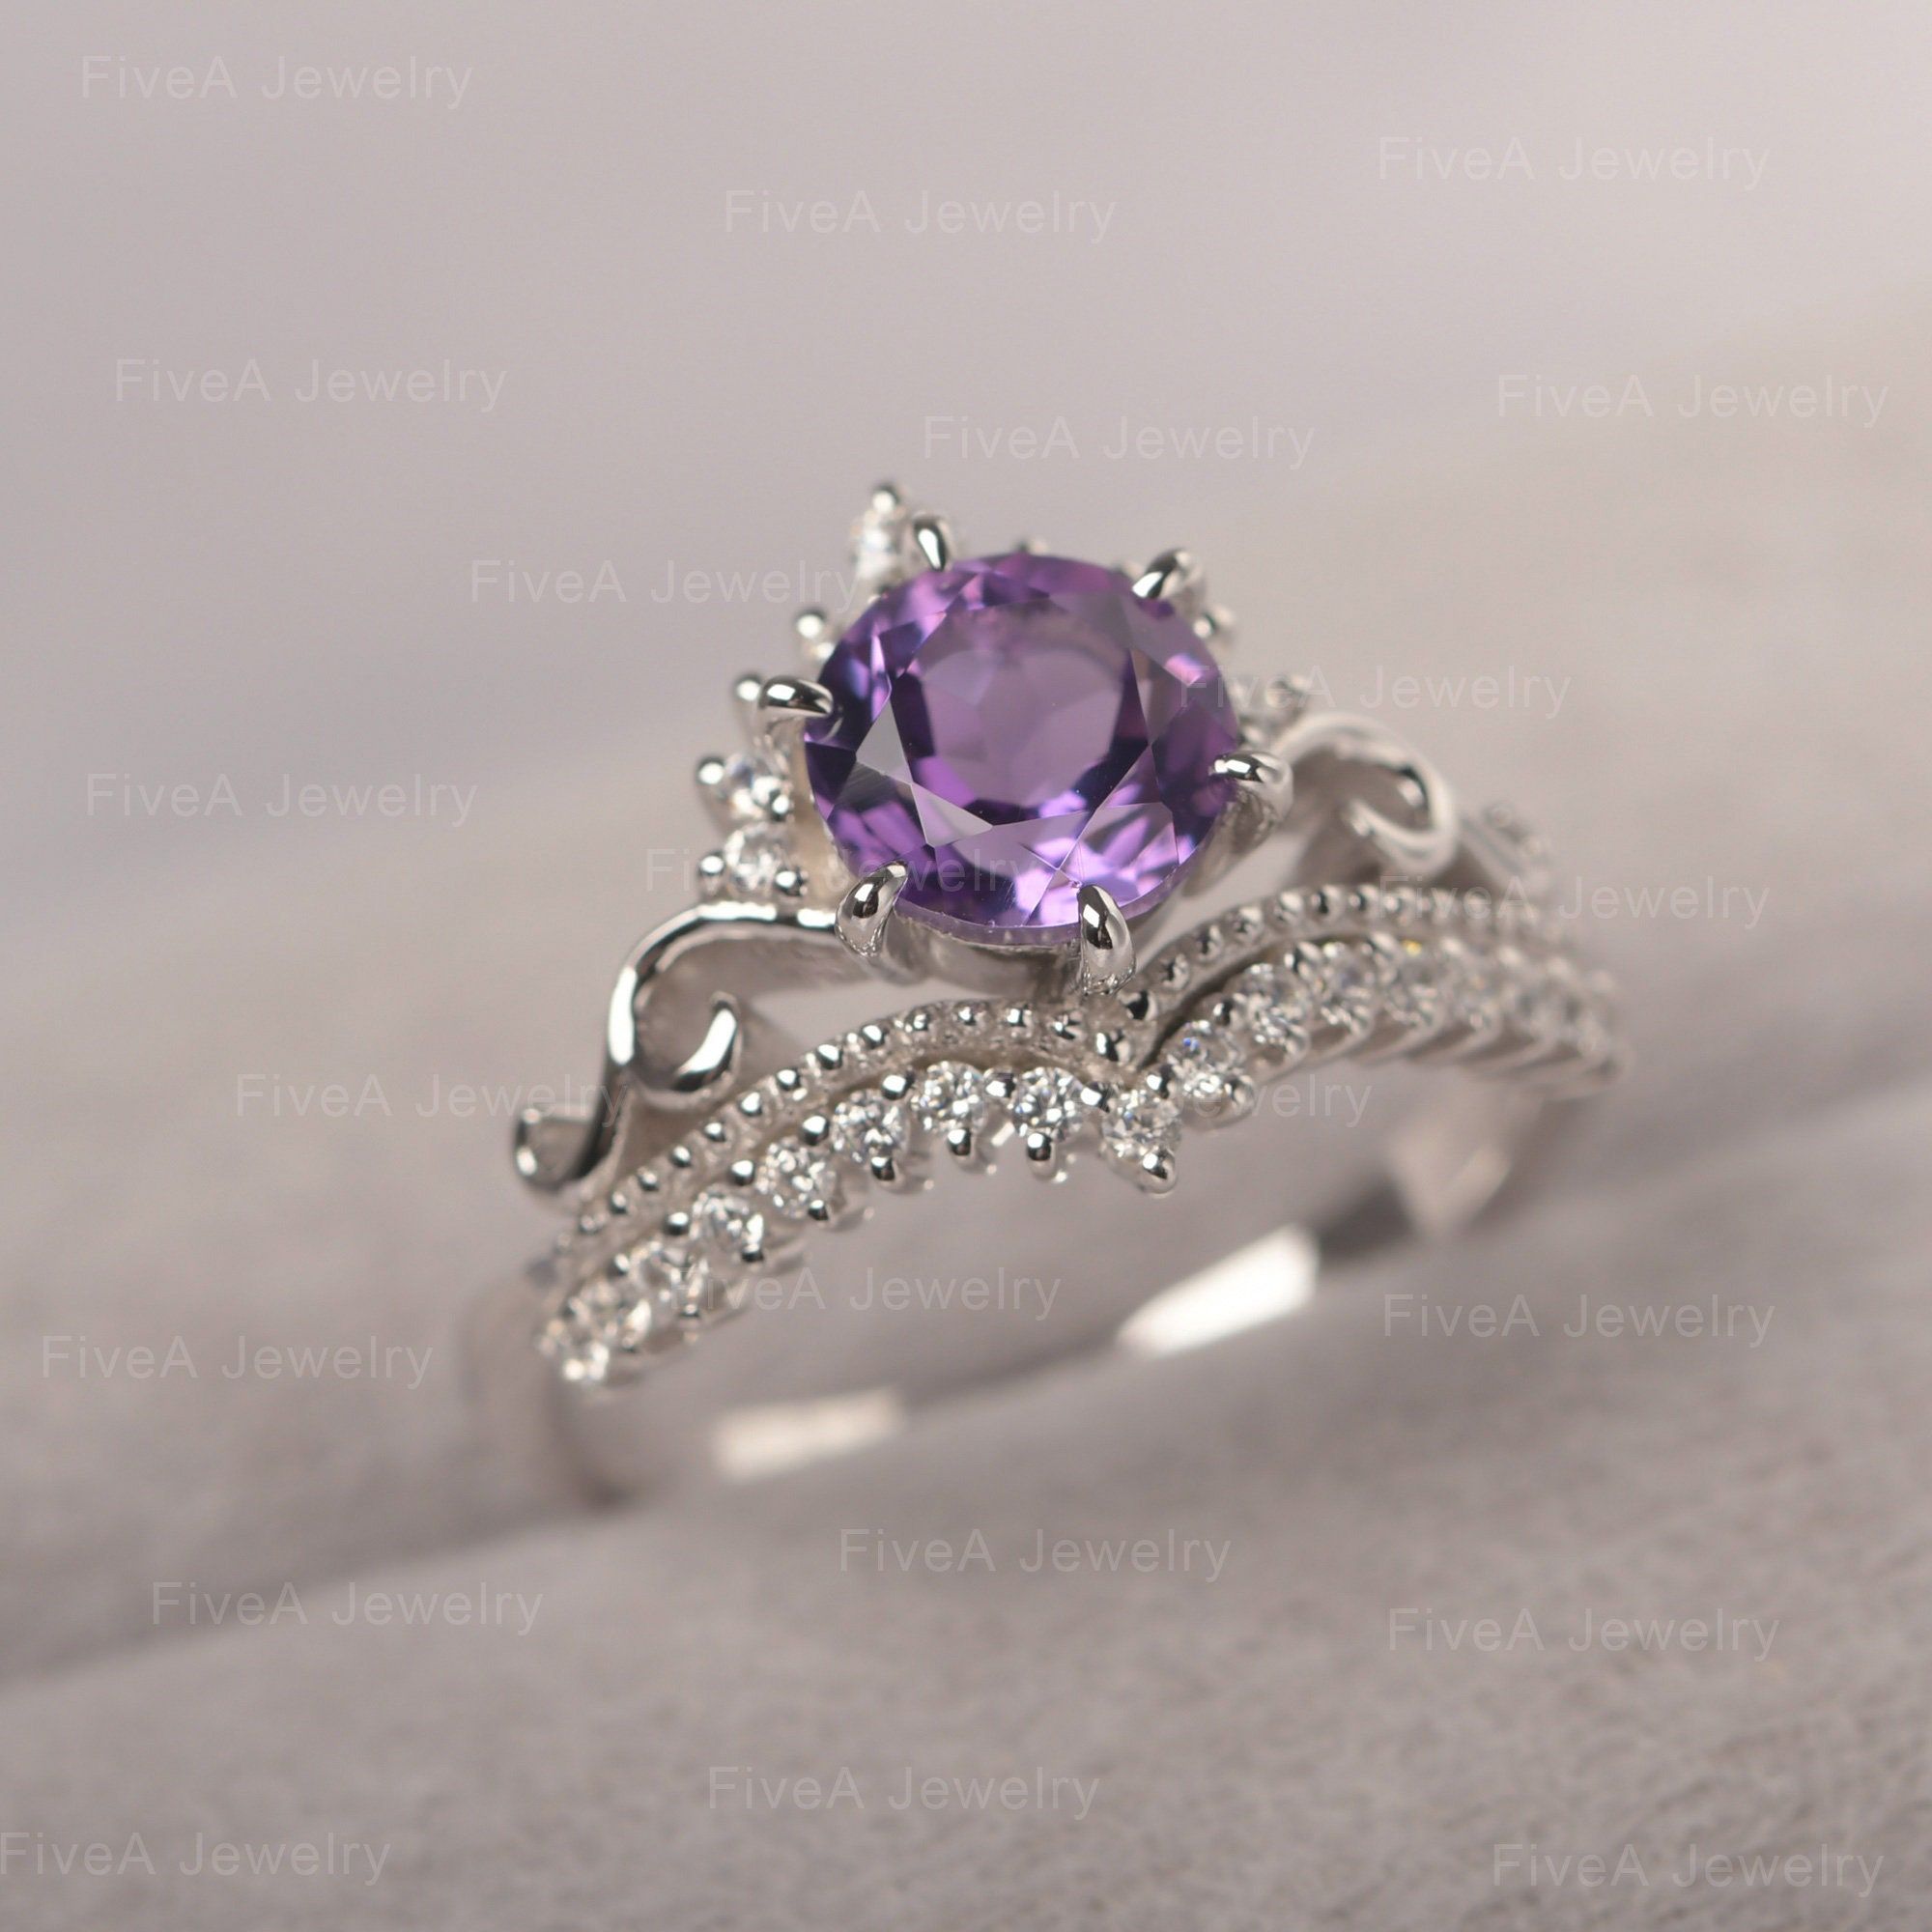 The Healing Power of Amethyst Rings: How
They Can Balance Your Energy